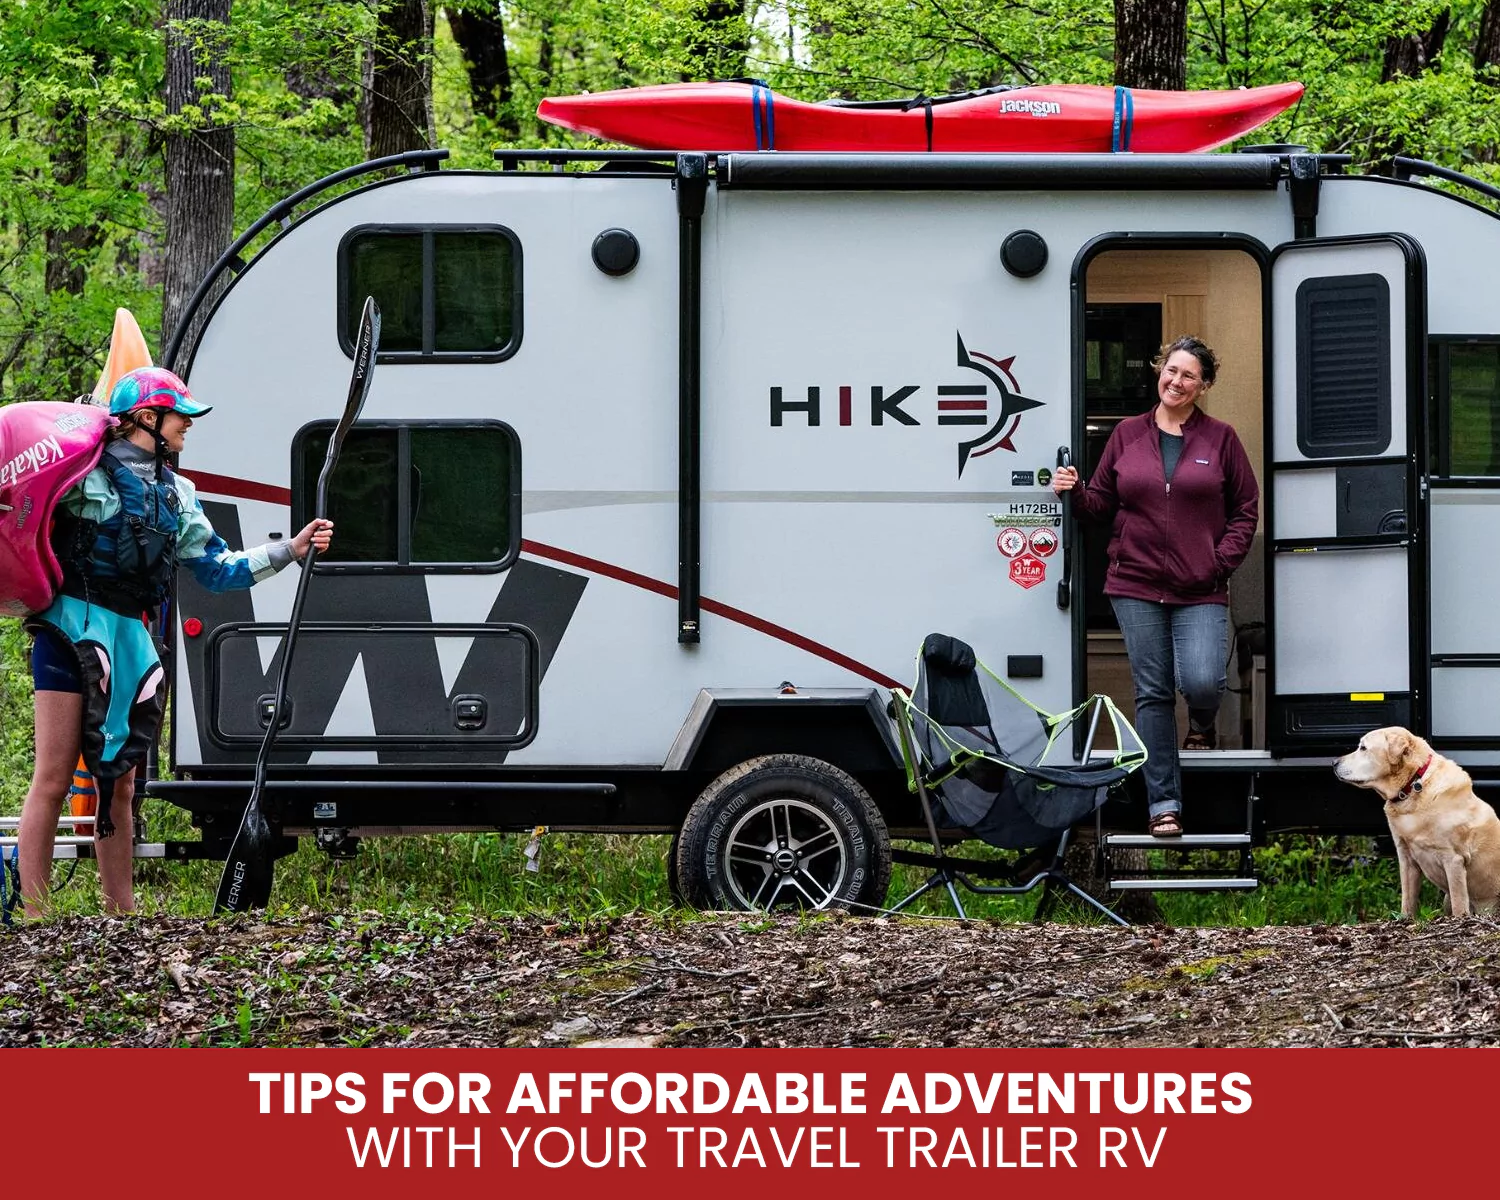 Tips for Affordable Adventures with Your Travel Trailer RV